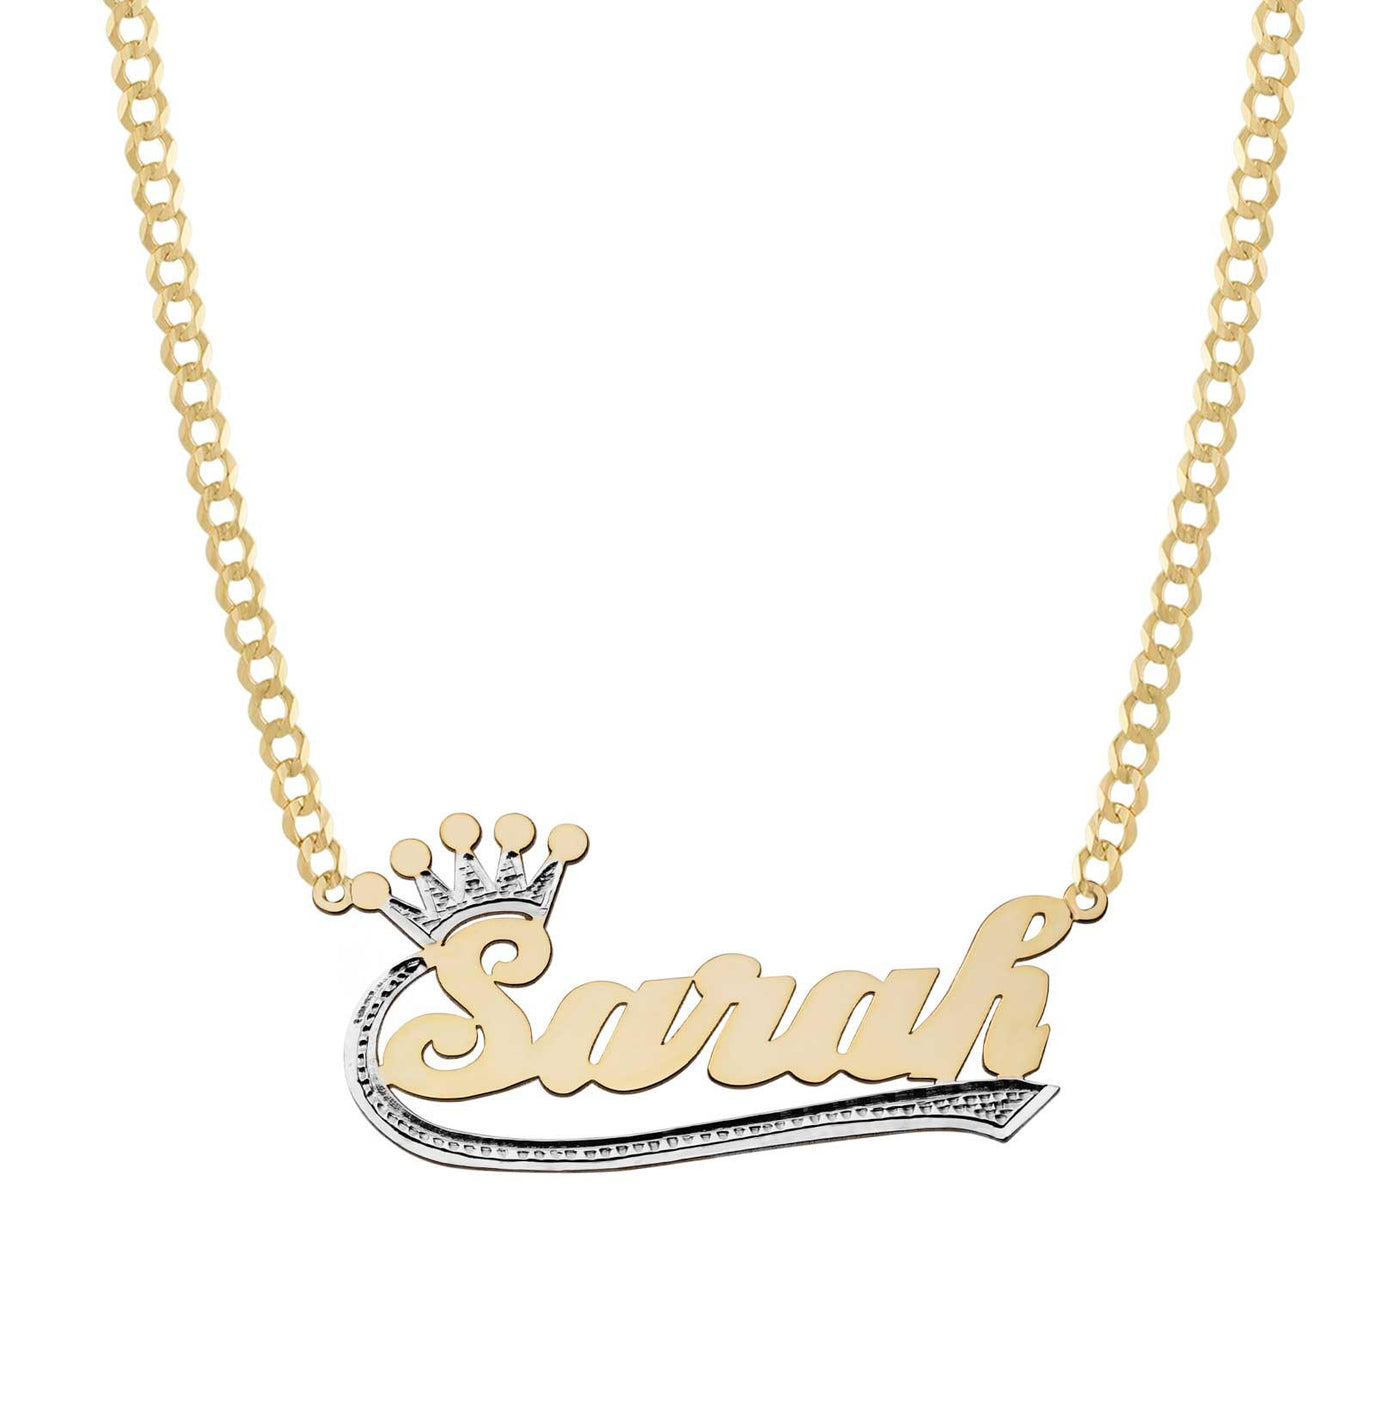 Ladies Crown Design Name Plate Necklace 14K Gold - Style 149 - bayamjewelry